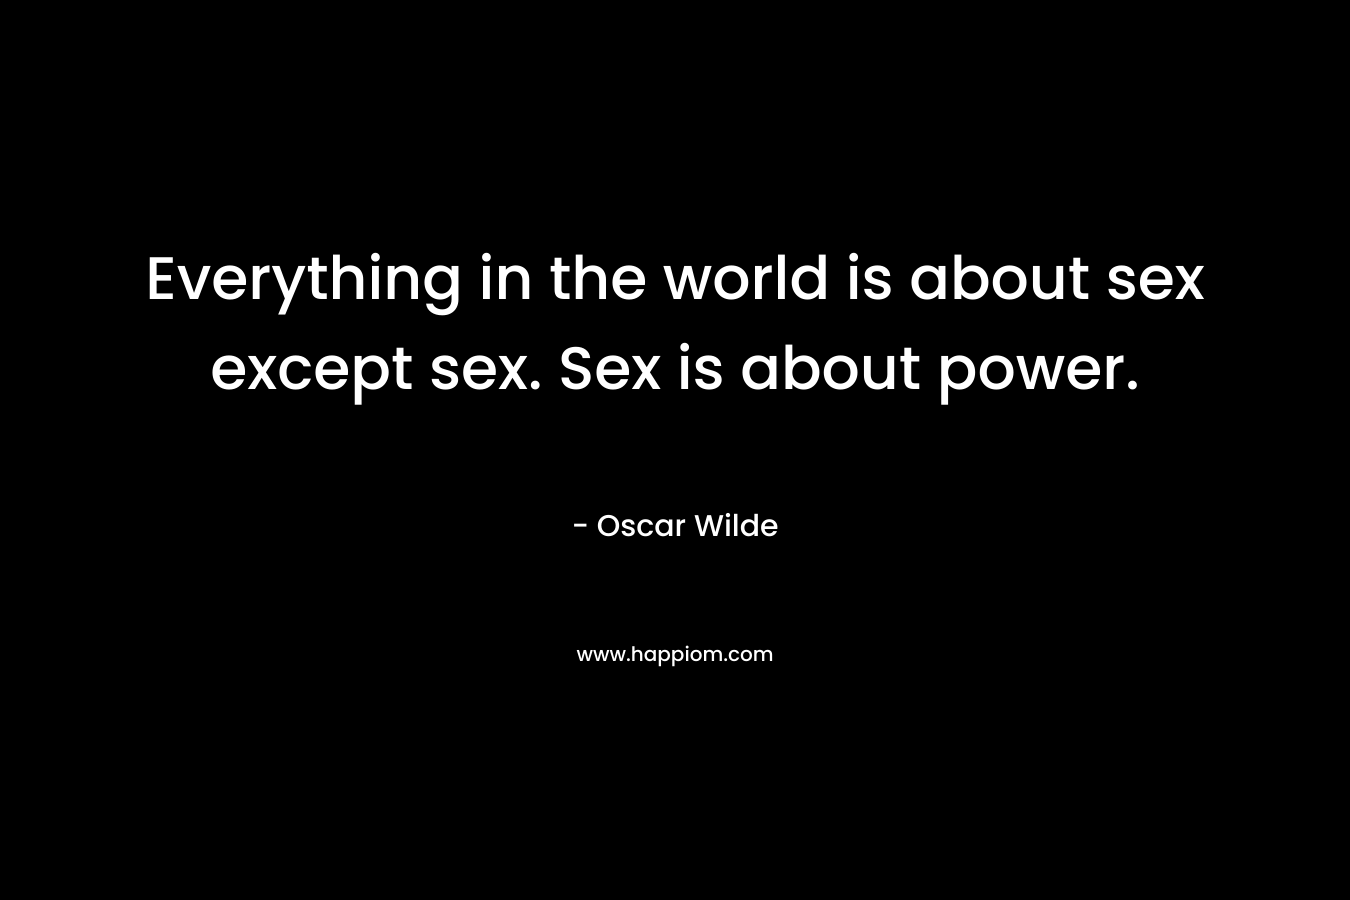 Everything in the world is about sex except sex. Sex is about power.